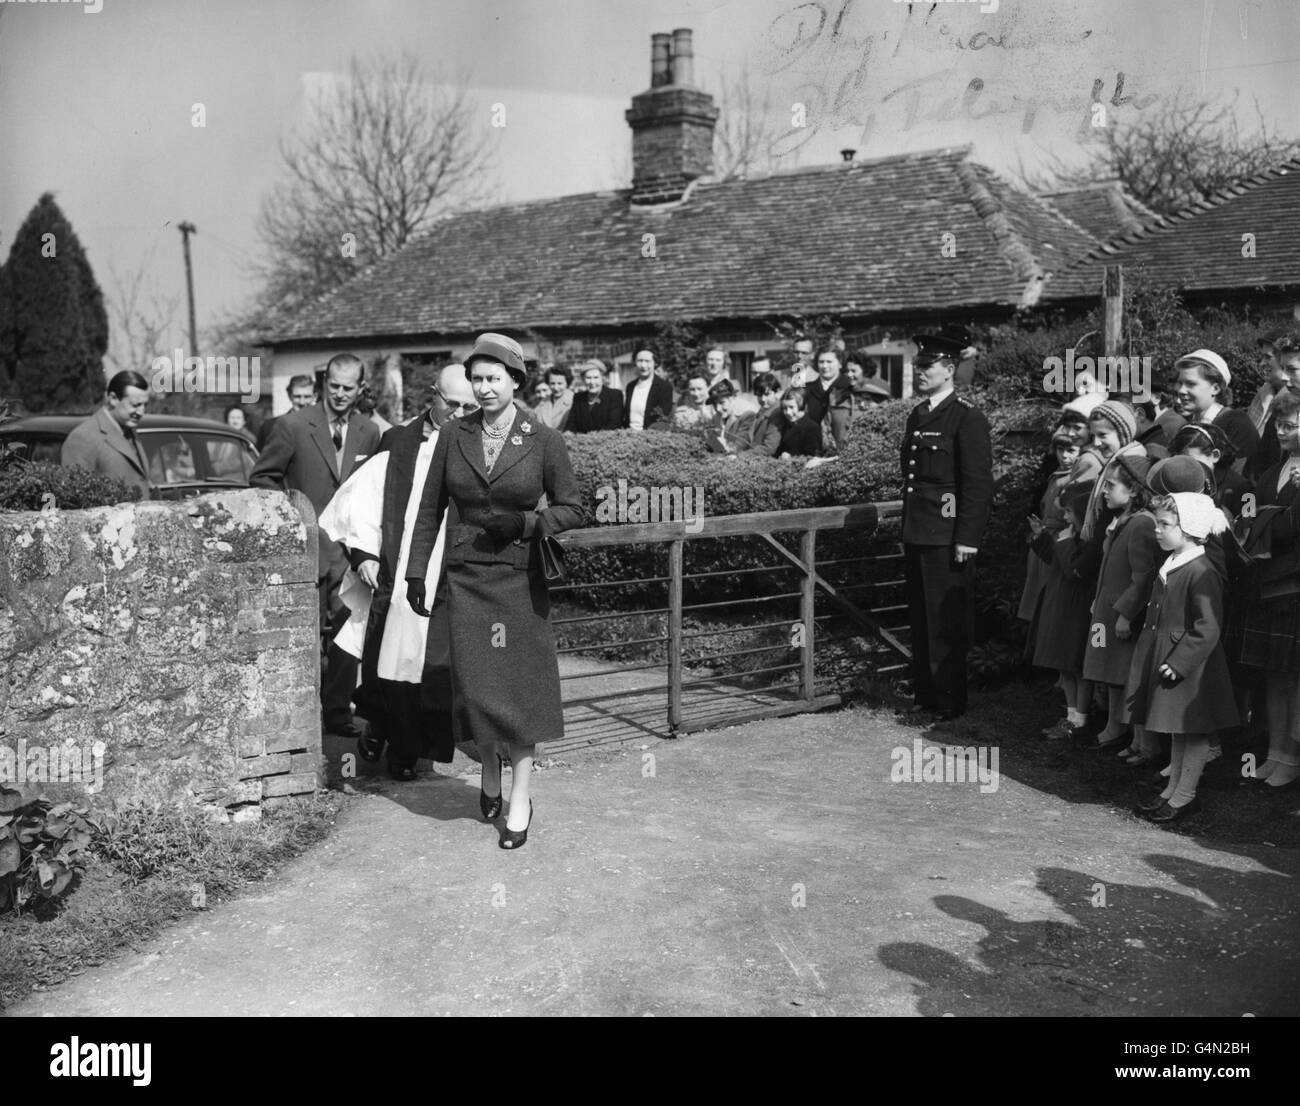 Queen Elizabeth II, accompanied by the vicar, the reverend H.L McDonald Liegeois, after attending morning service at the 11th century church at Mersham, near Ashford in Kent. The Queen and Duke of Edinburgh are the guests of Lord and Lady Brabourne at Mersham. Stock Photo